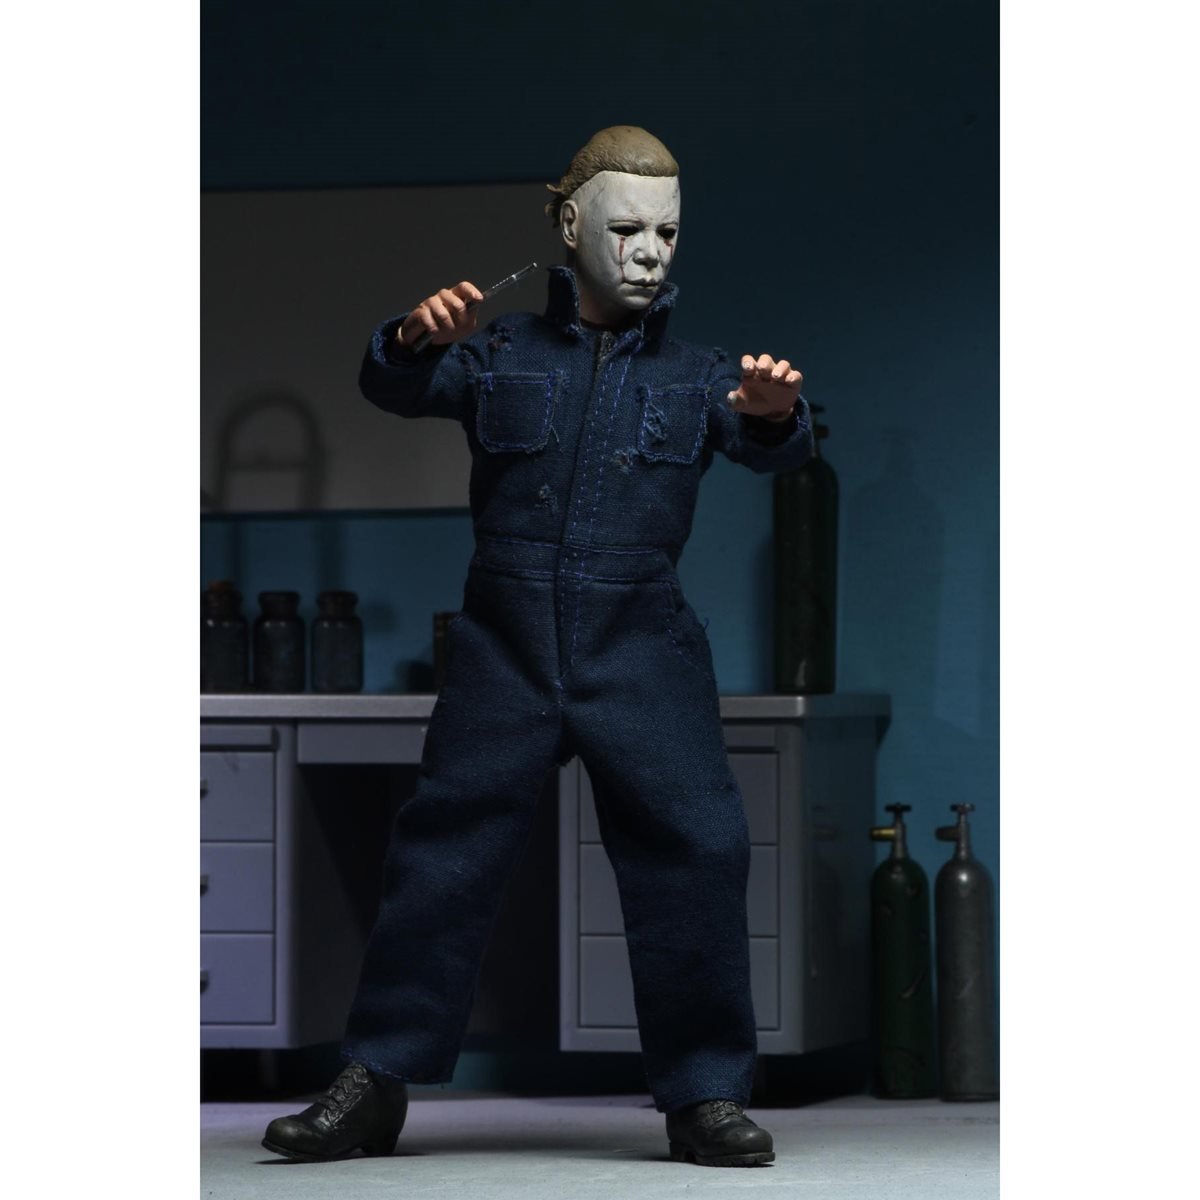 Action Figure for sale online Neca Halloween 2 - Michael Myers Clothed 1981 